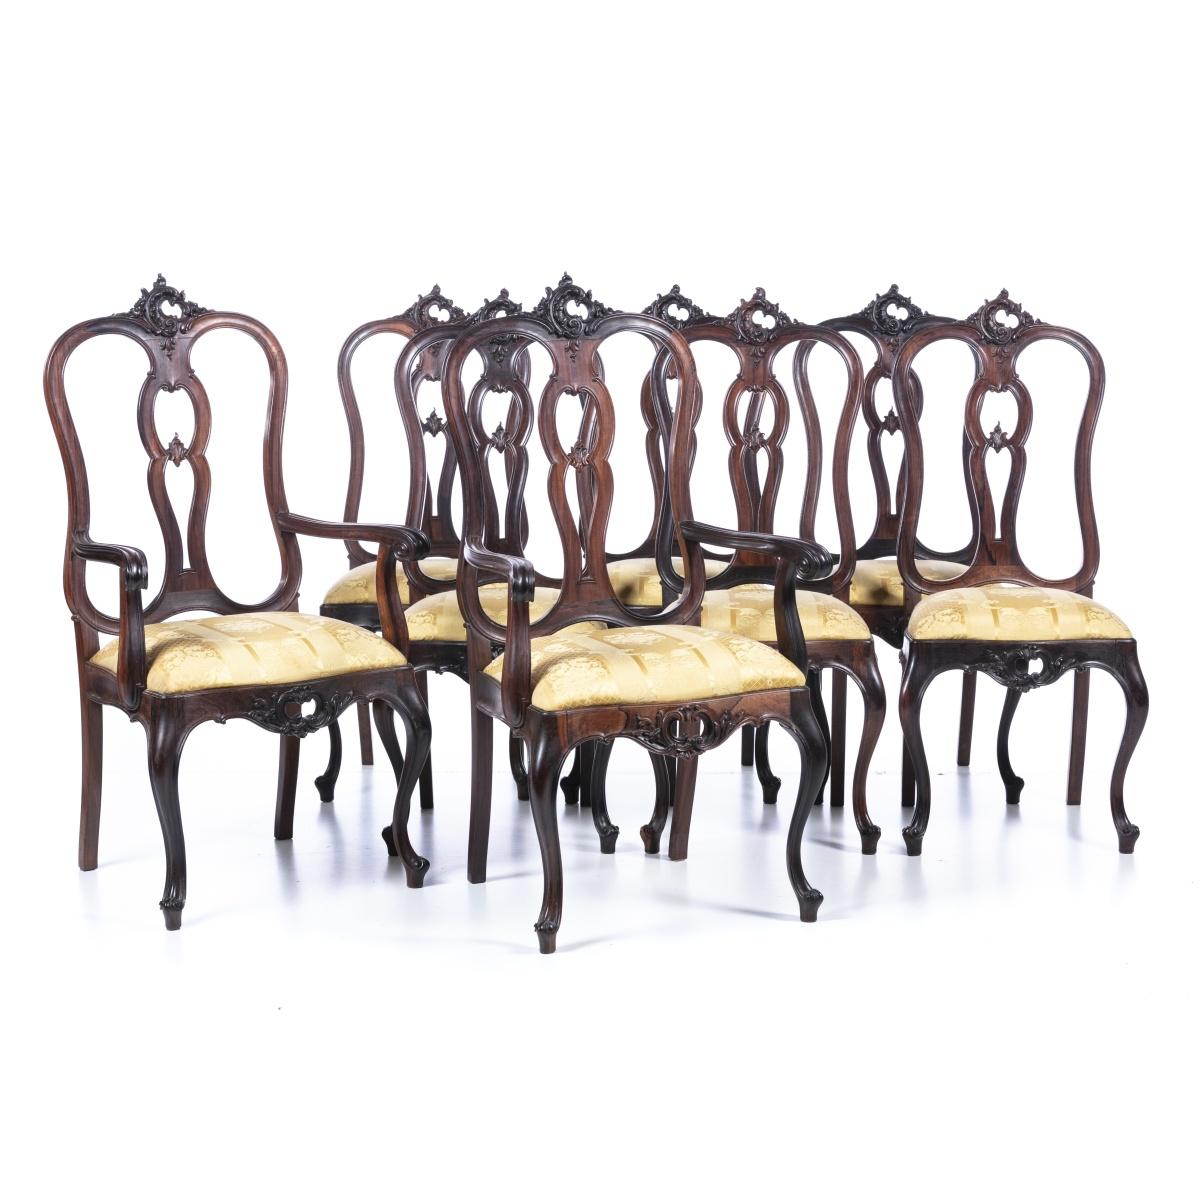 Portuguese Set of 6 Chairs and 2 Armchairs 19th Century